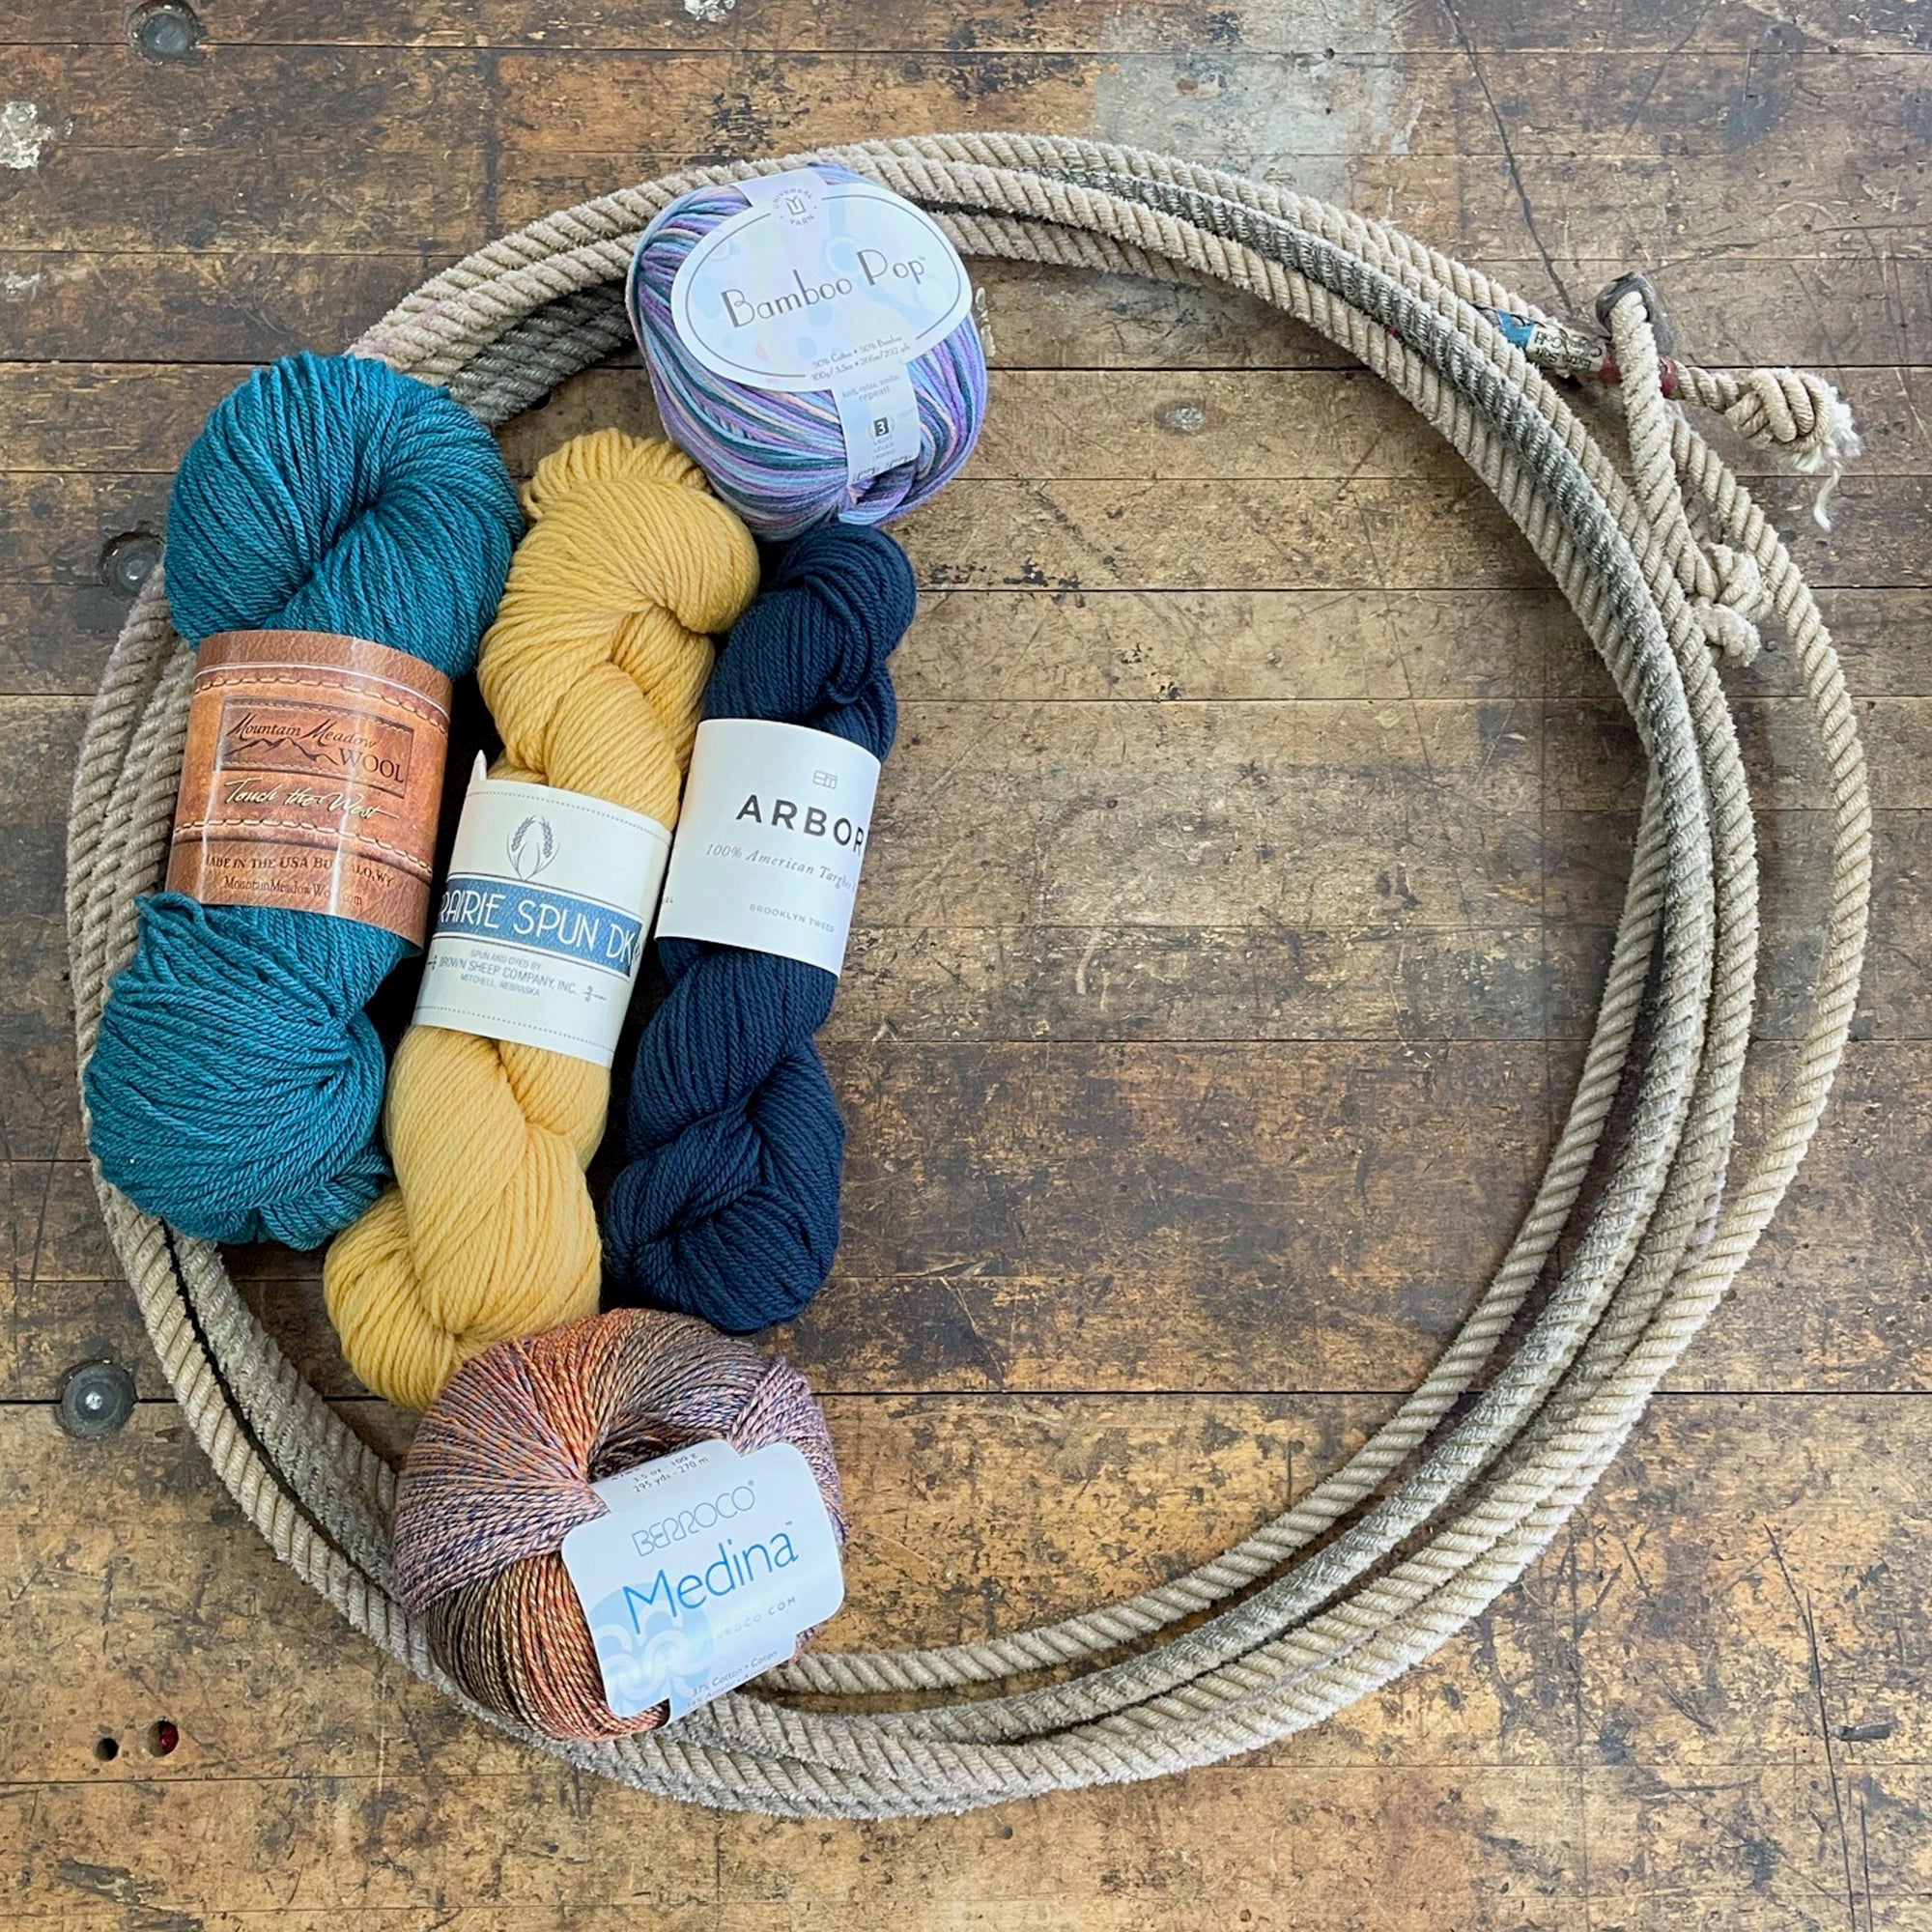 A lariat filled with DK weight yarn